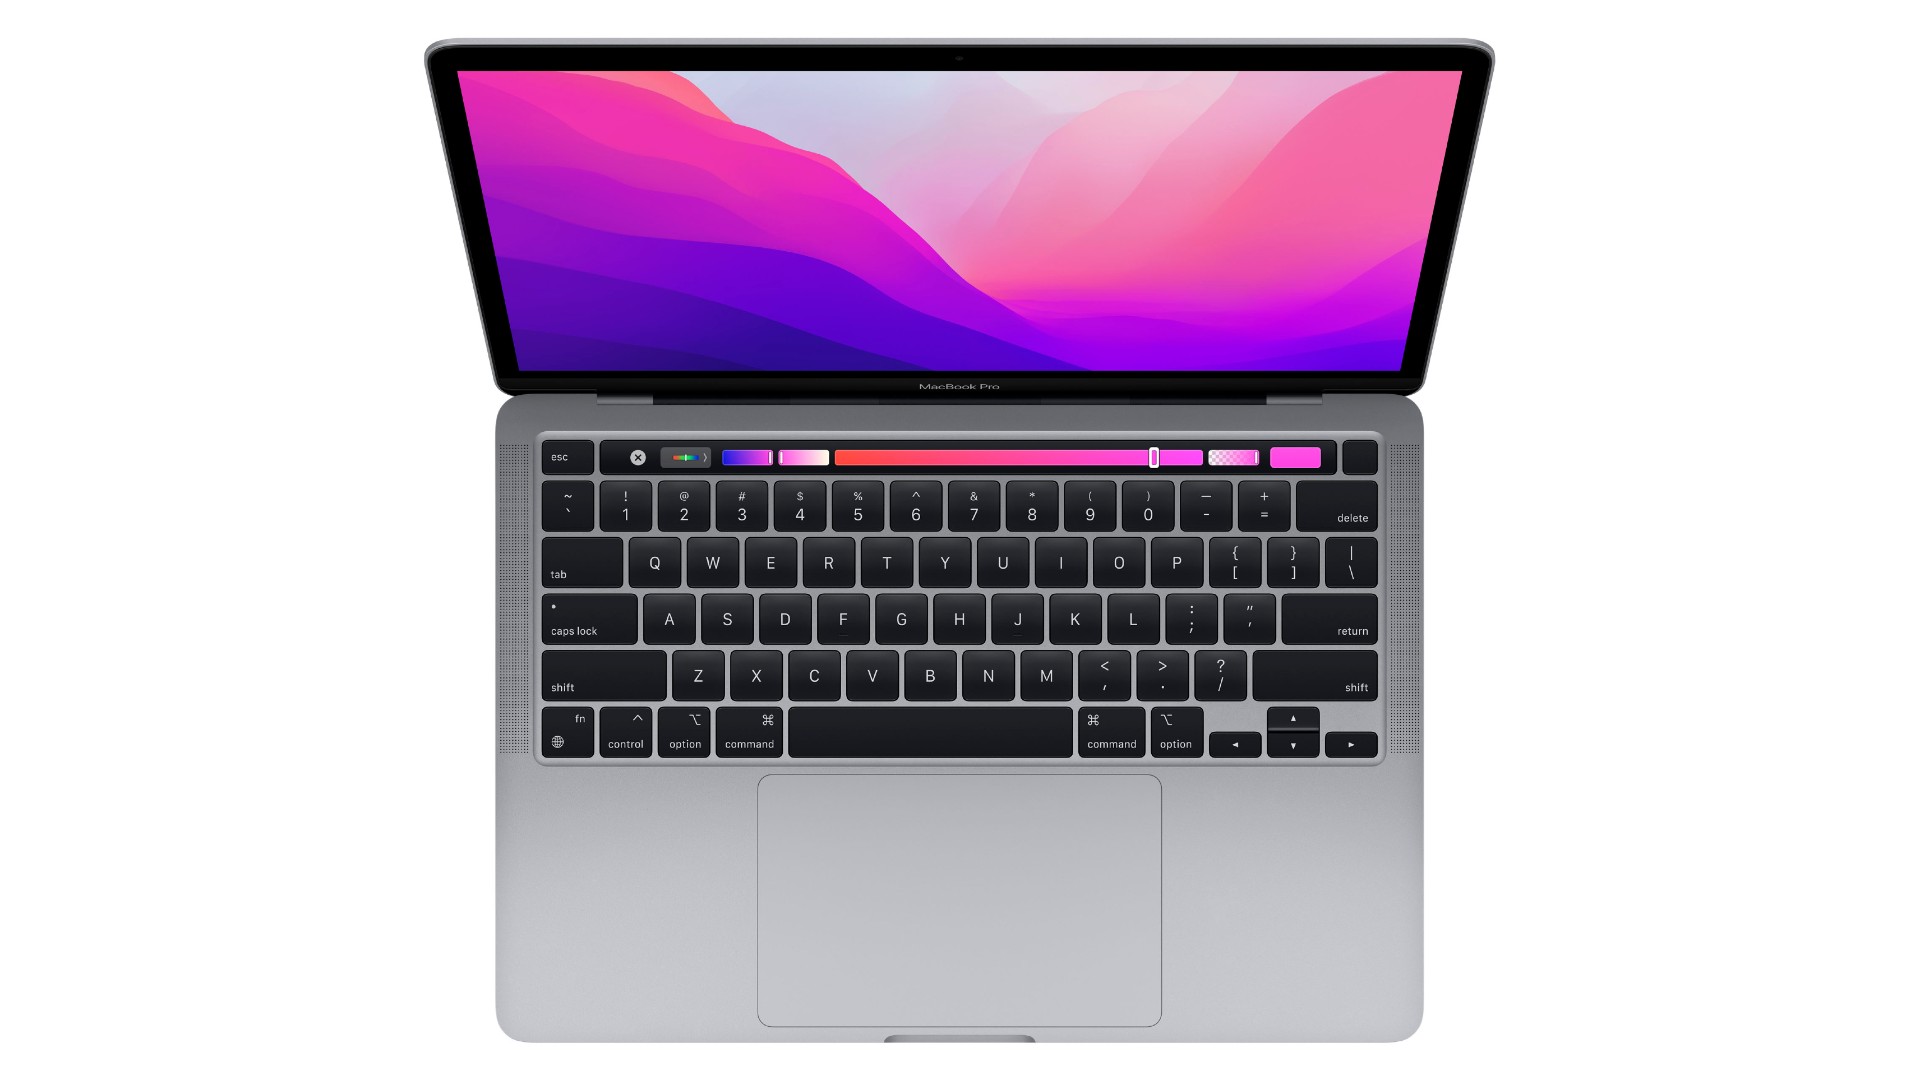 Save big on the MacBook Pro M2 - with Apple’s longest-lasting battery life it is perfect for students and professionals